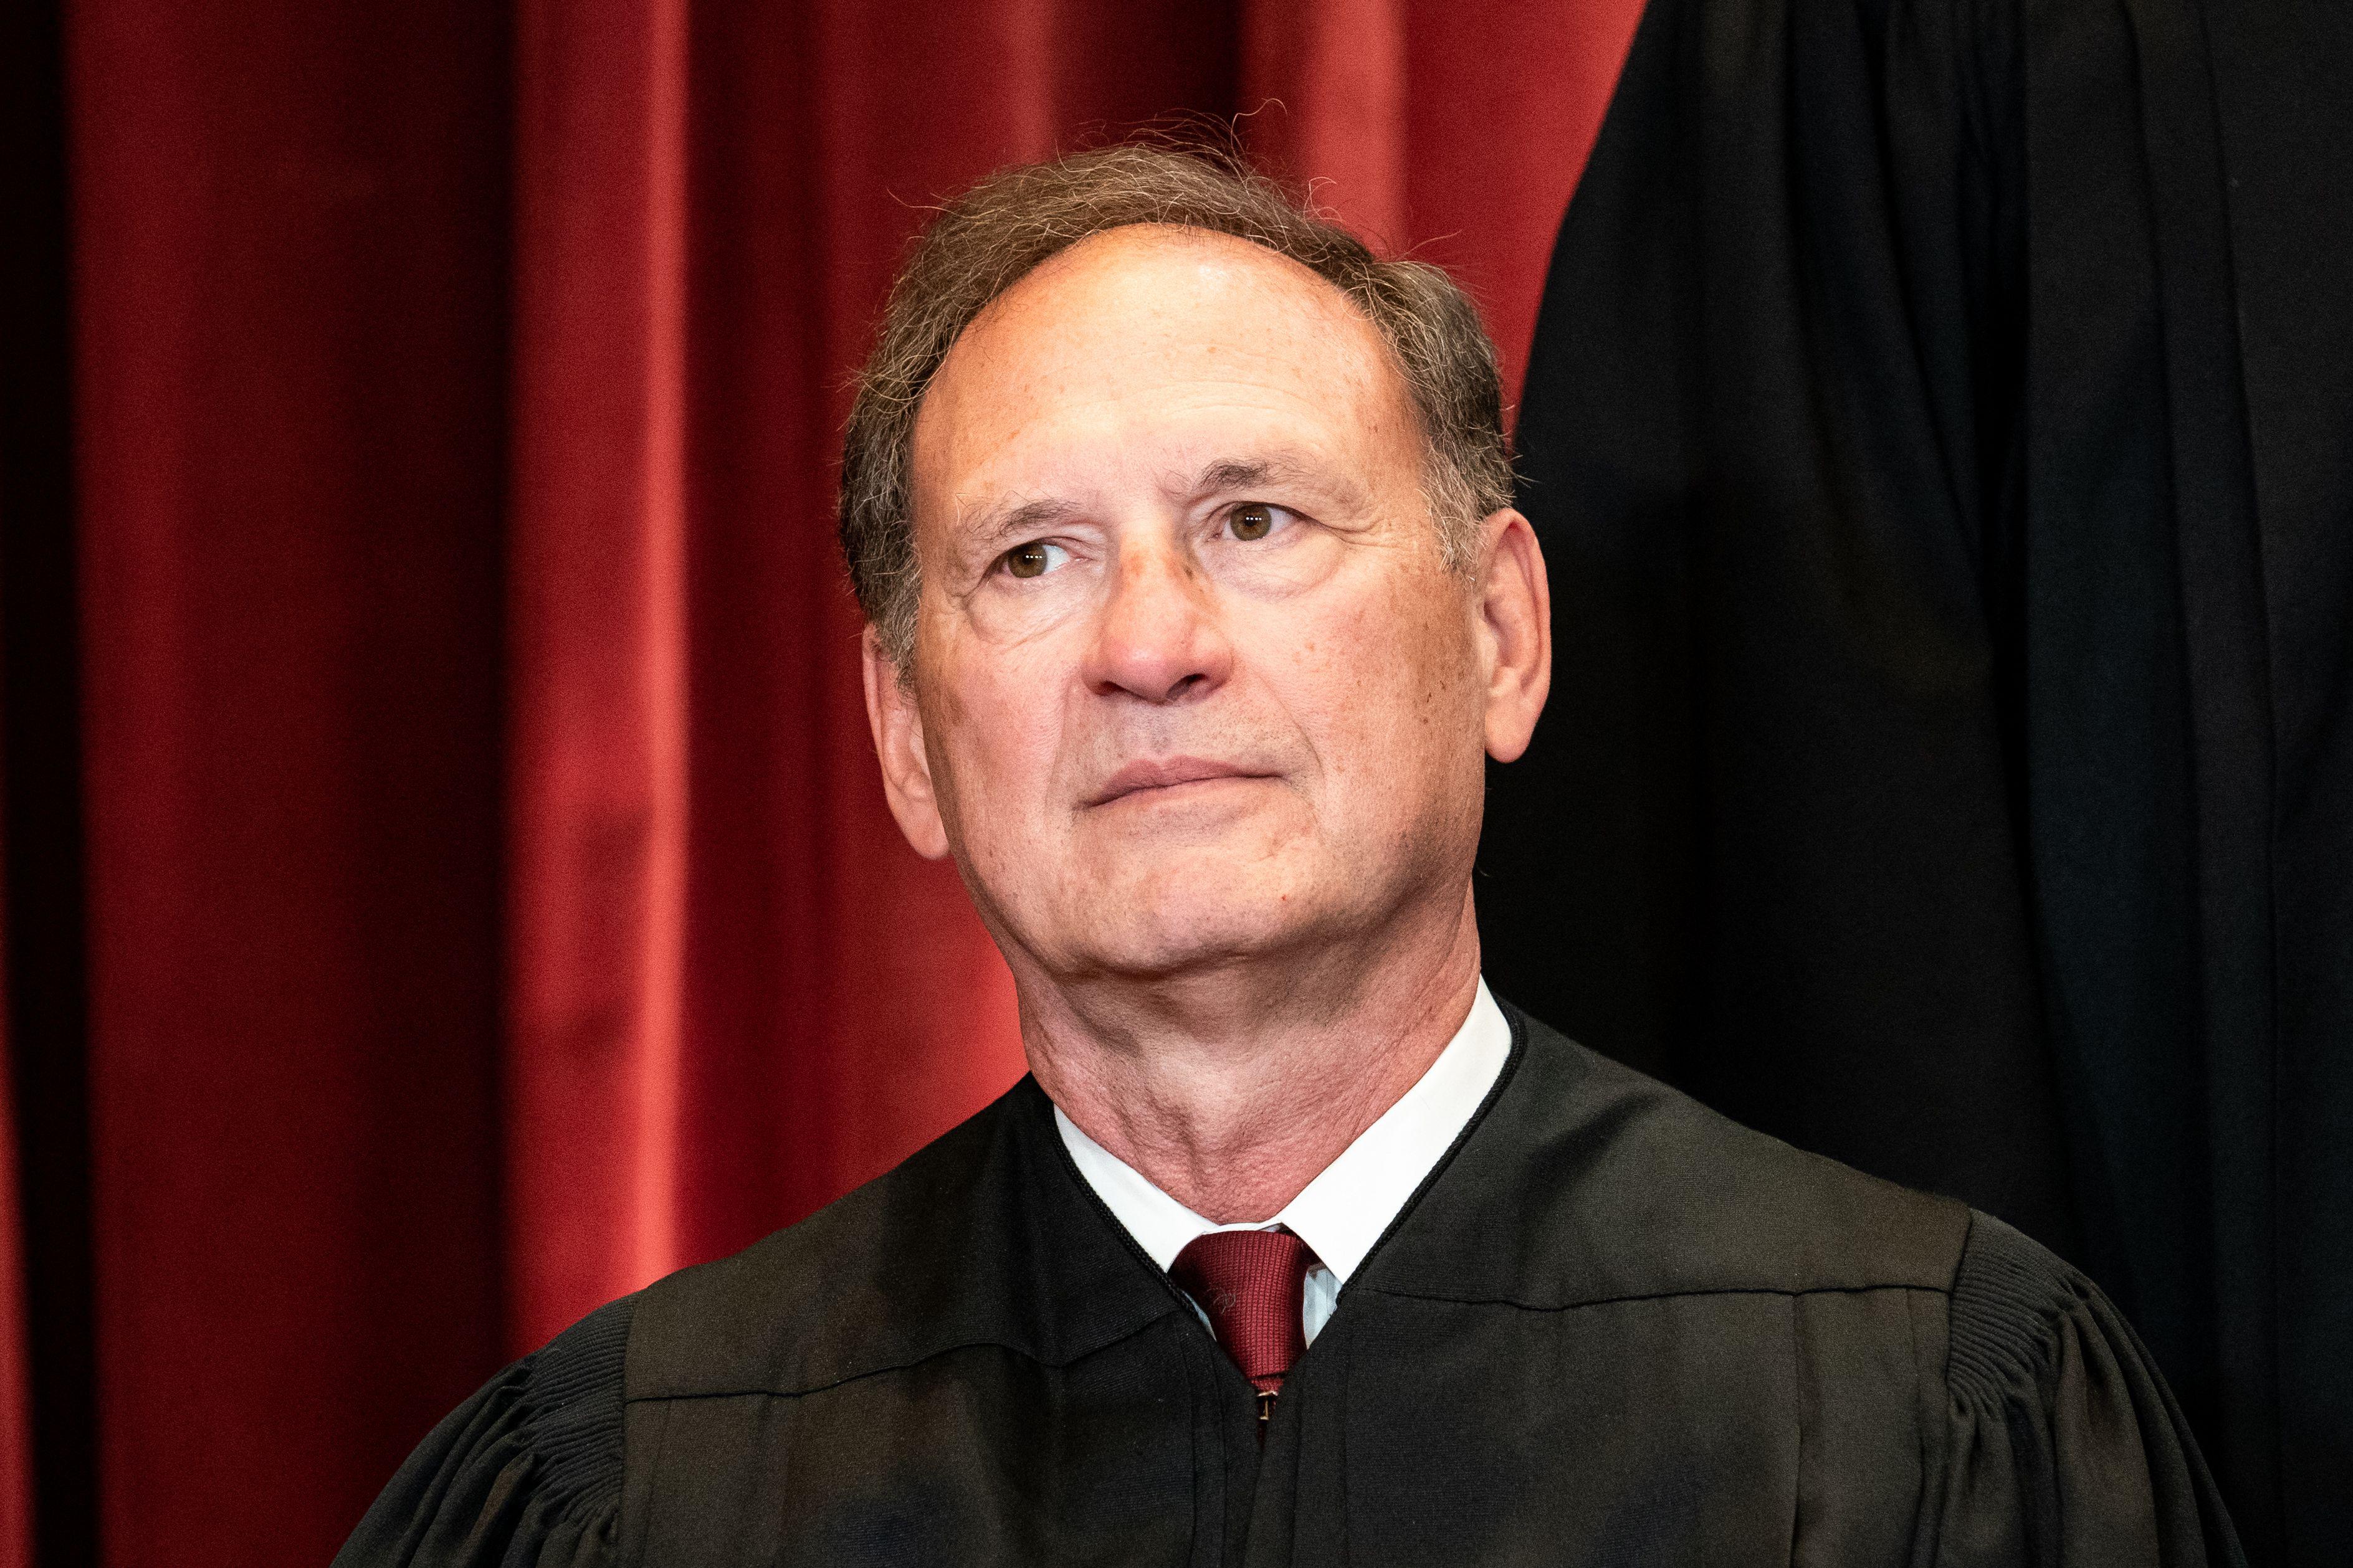 Alito sitting in his robes